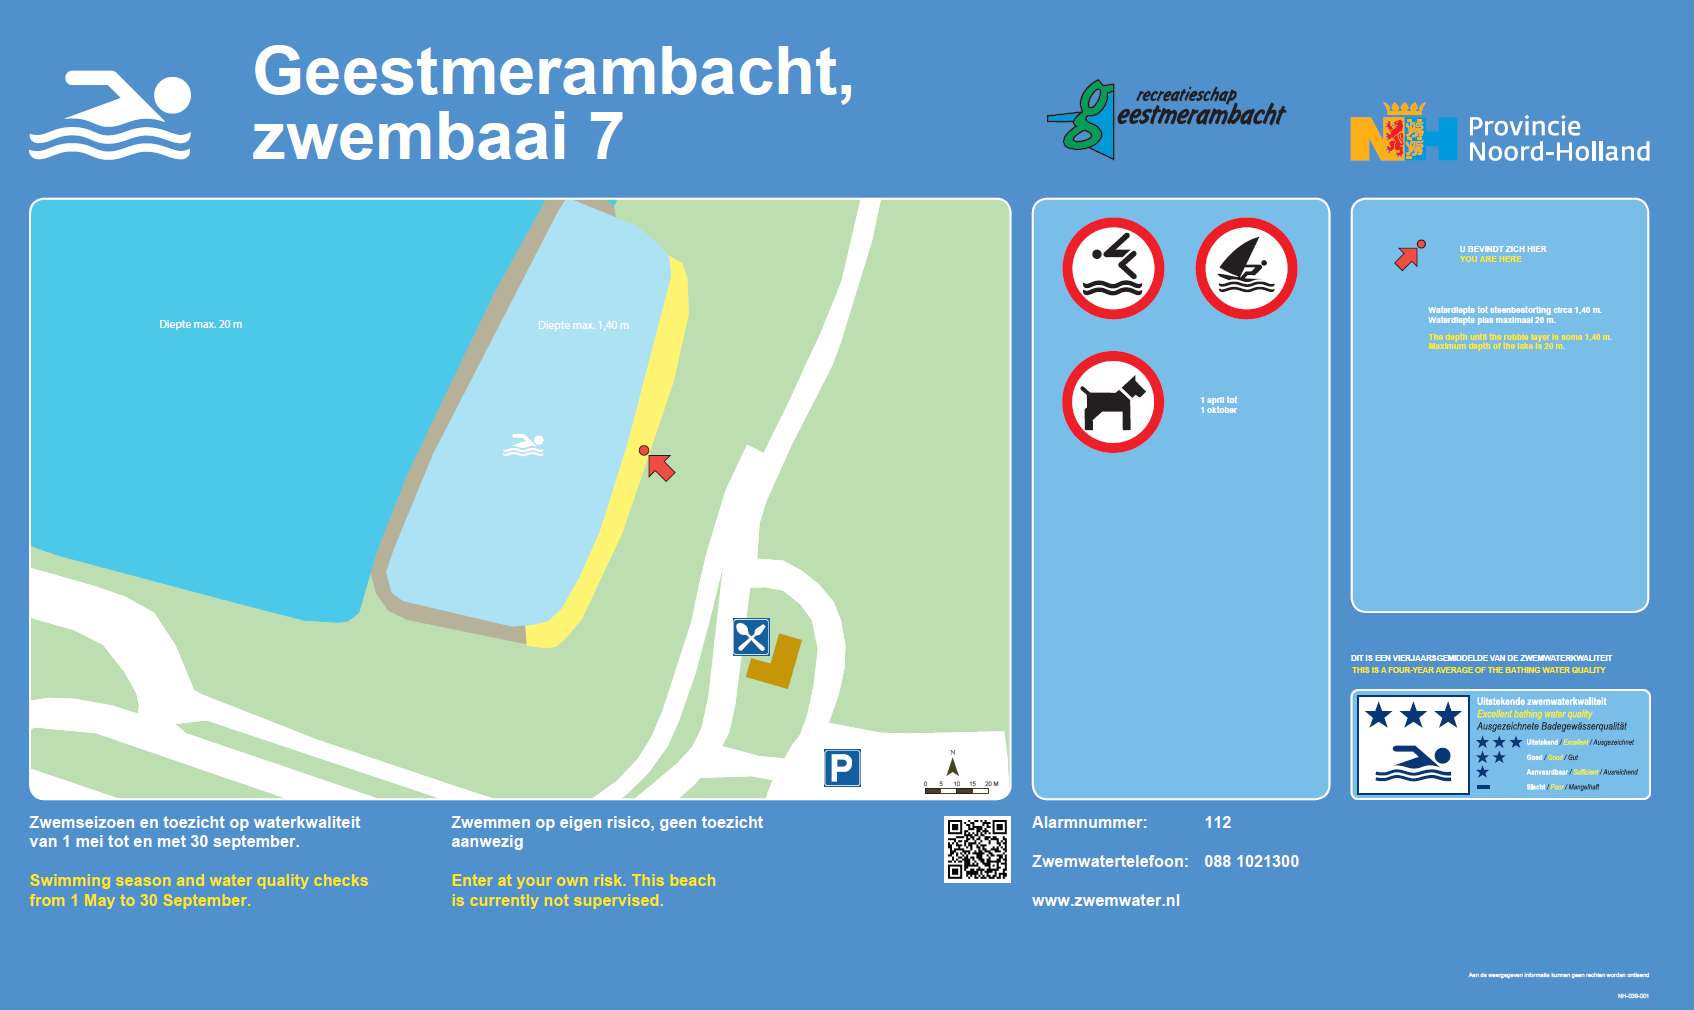 The information board at the swimming location Geestmerambacht, Zwembaai 7